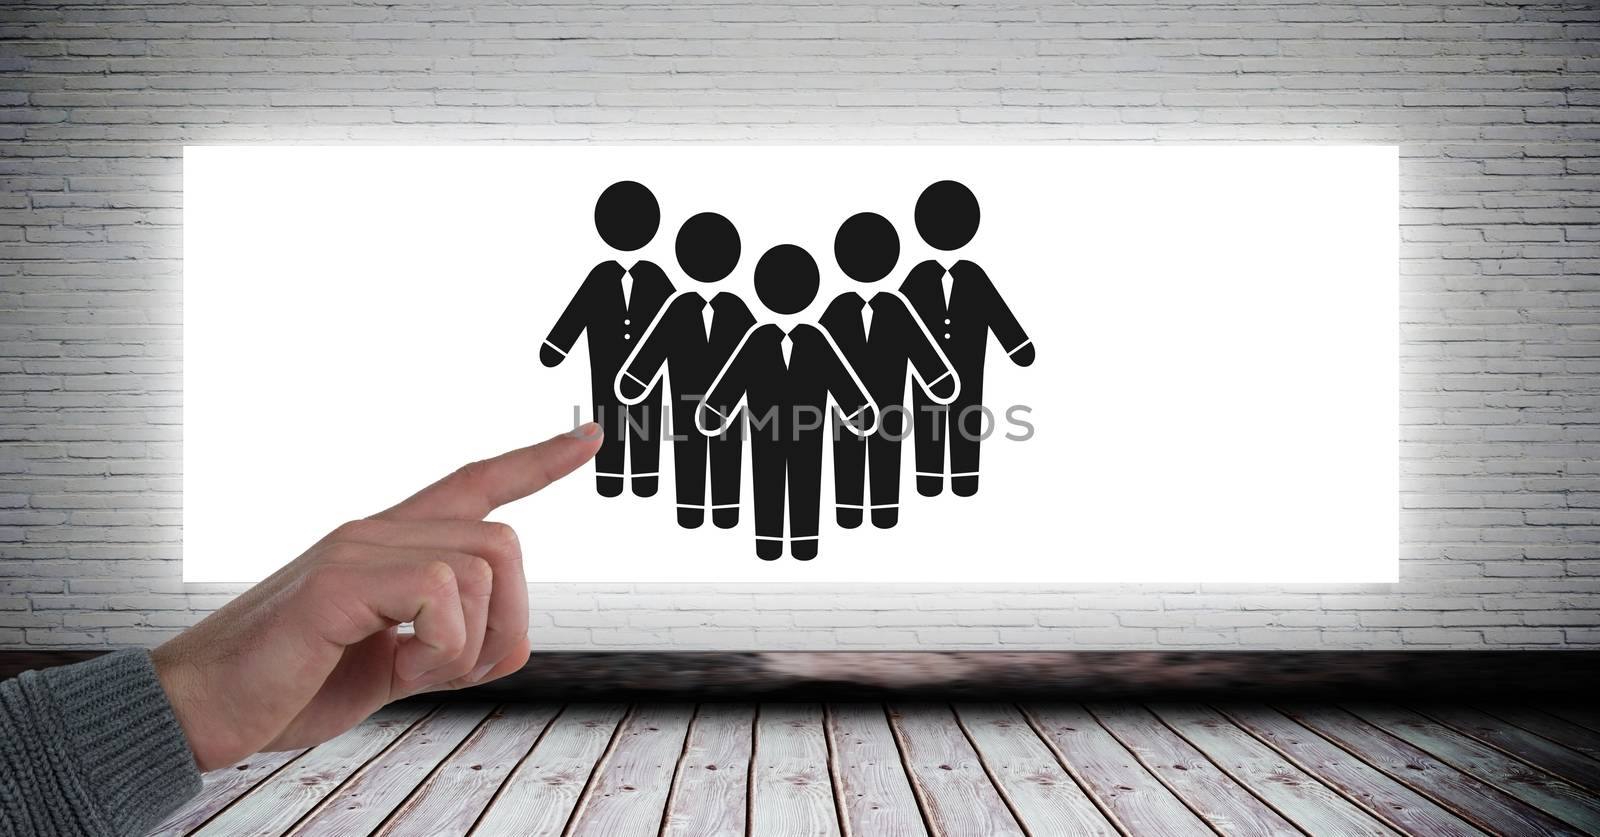 Digital composite of Hand pointing at people group icon